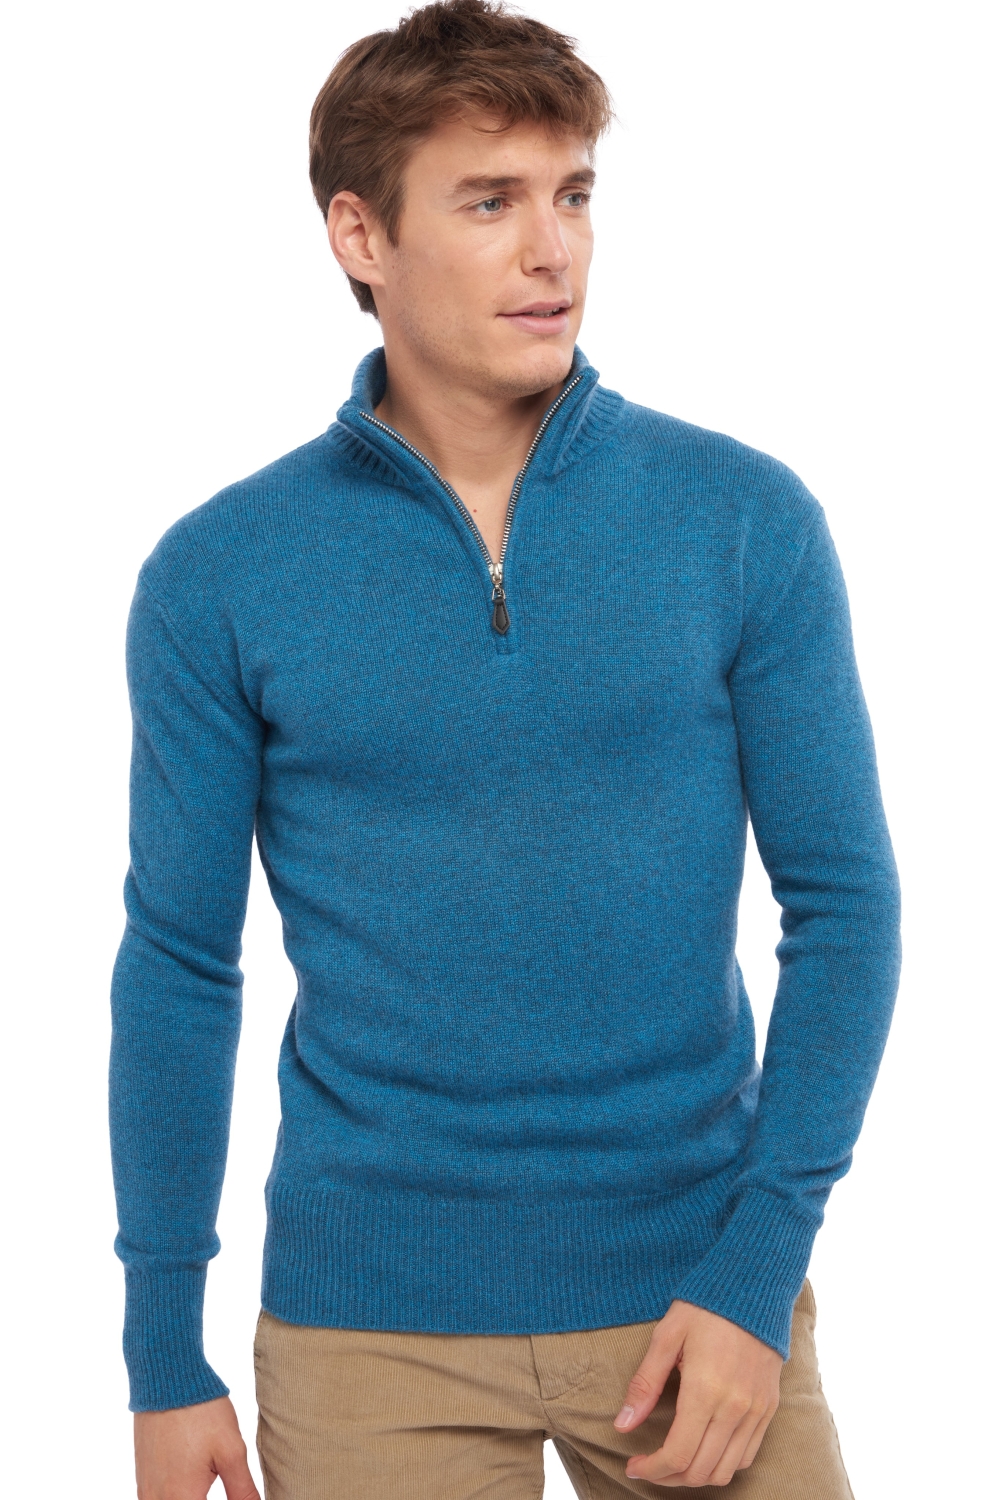 Cashmere men polo style sweaters donovan manor blue 3xl